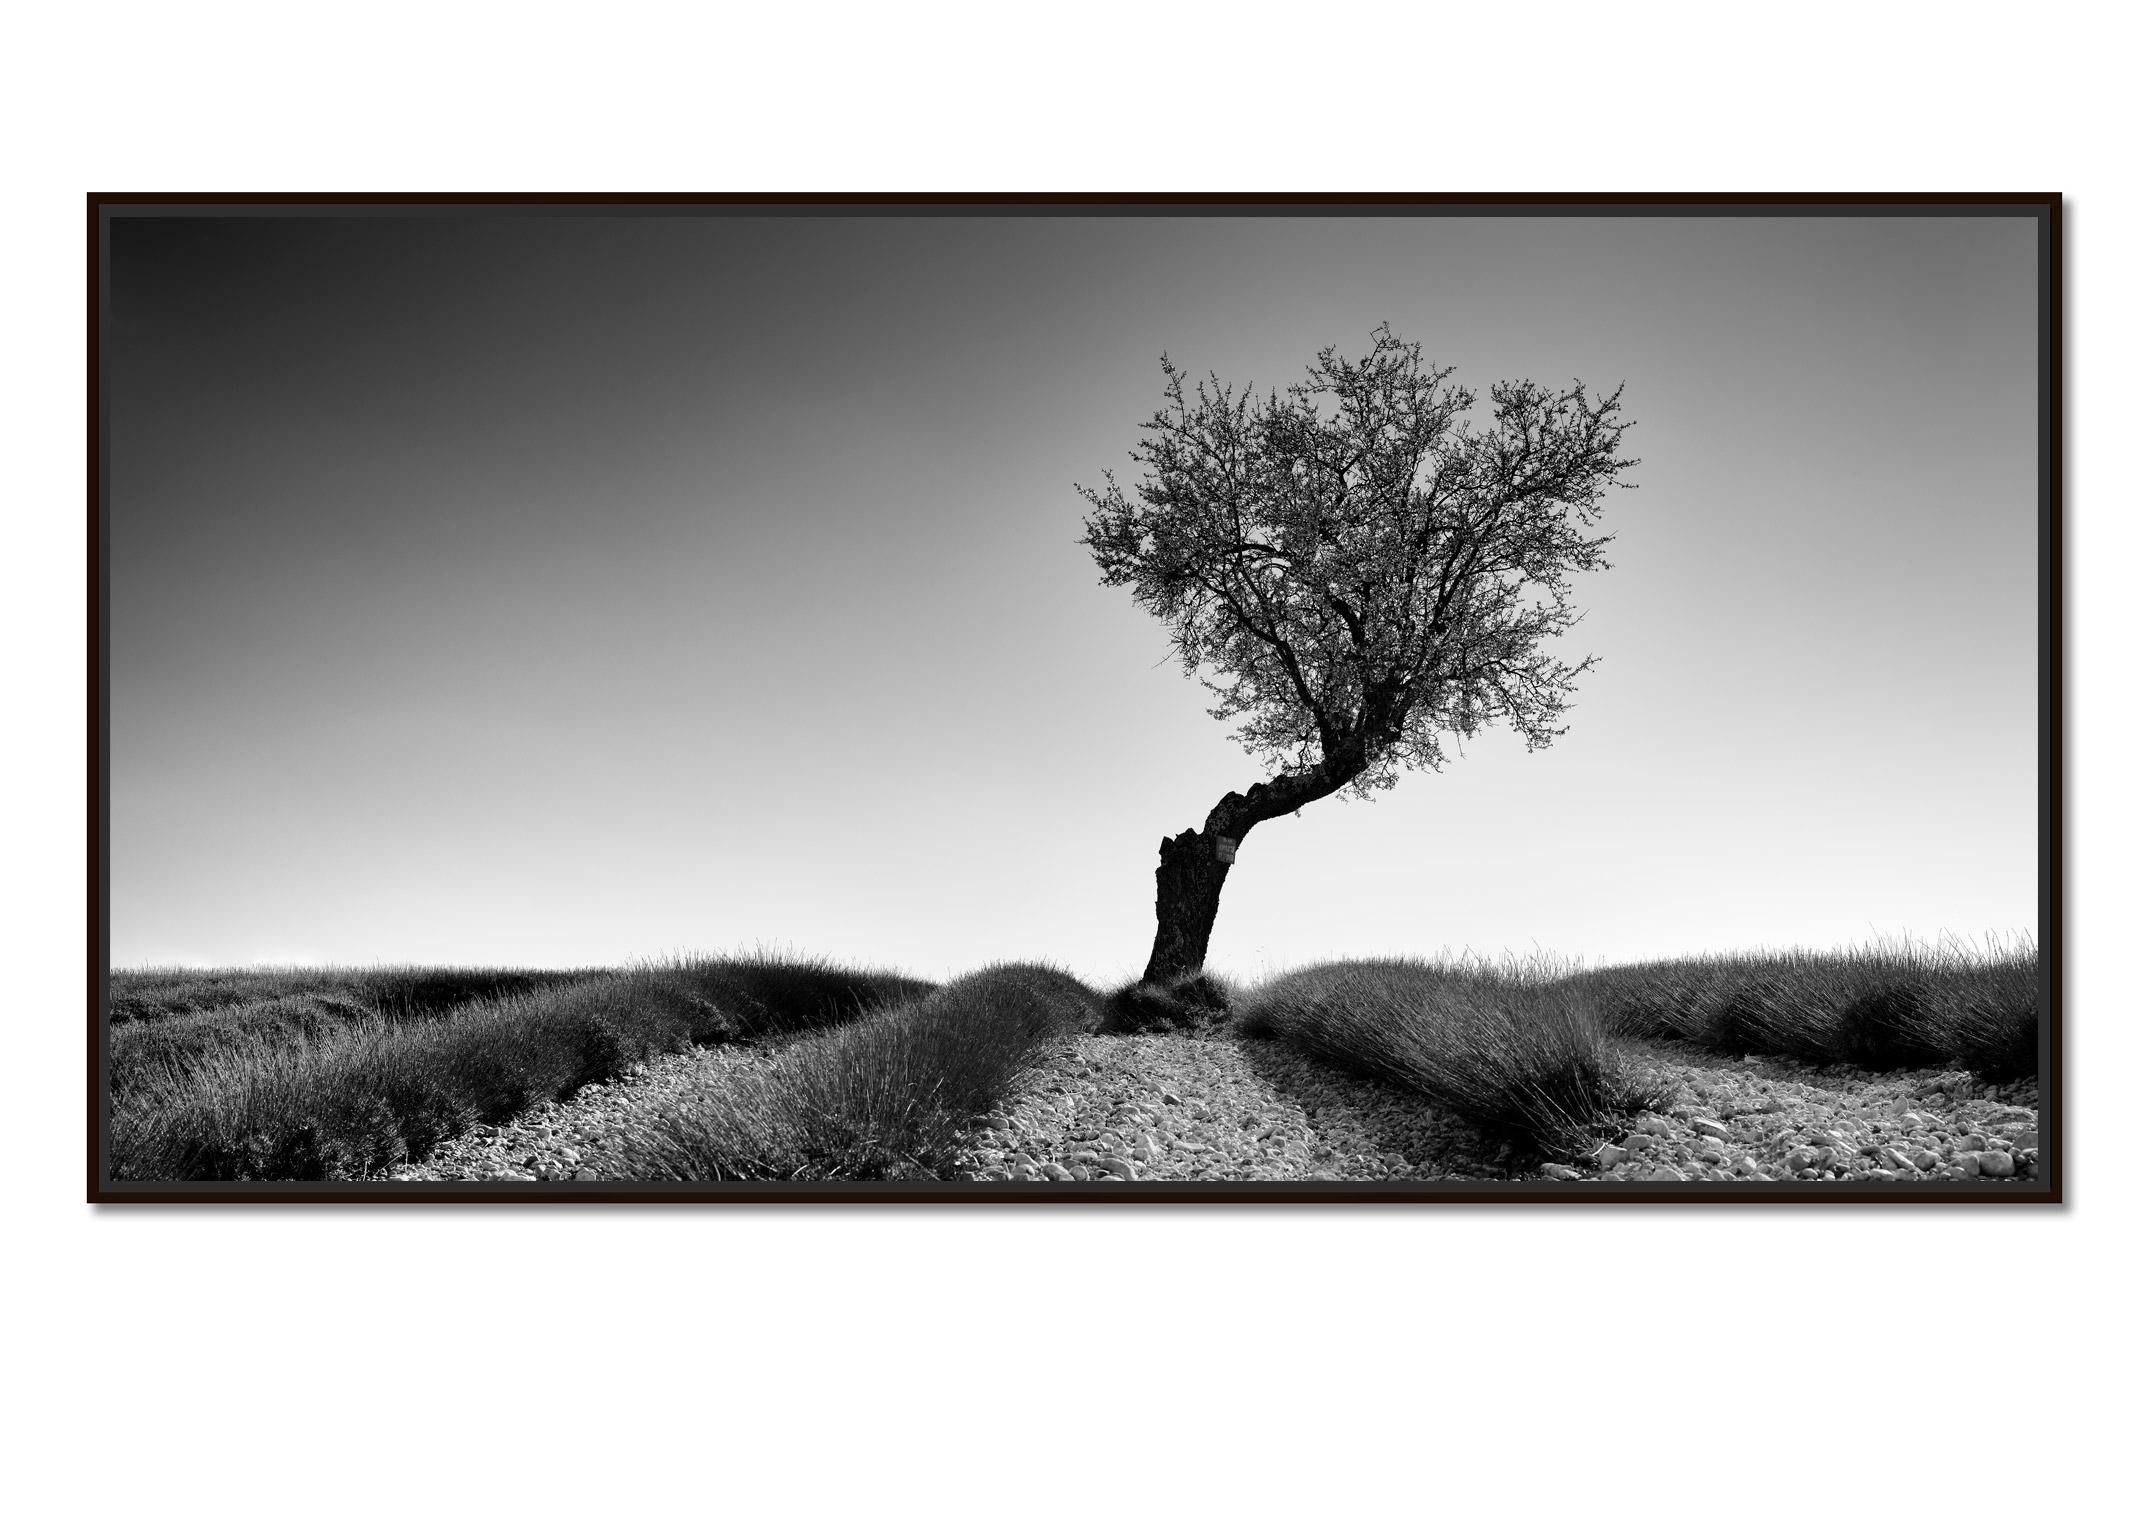 Lavender Field with Tree Panorama, black and white photography, art landscape - Photograph by Gerald Berghammer